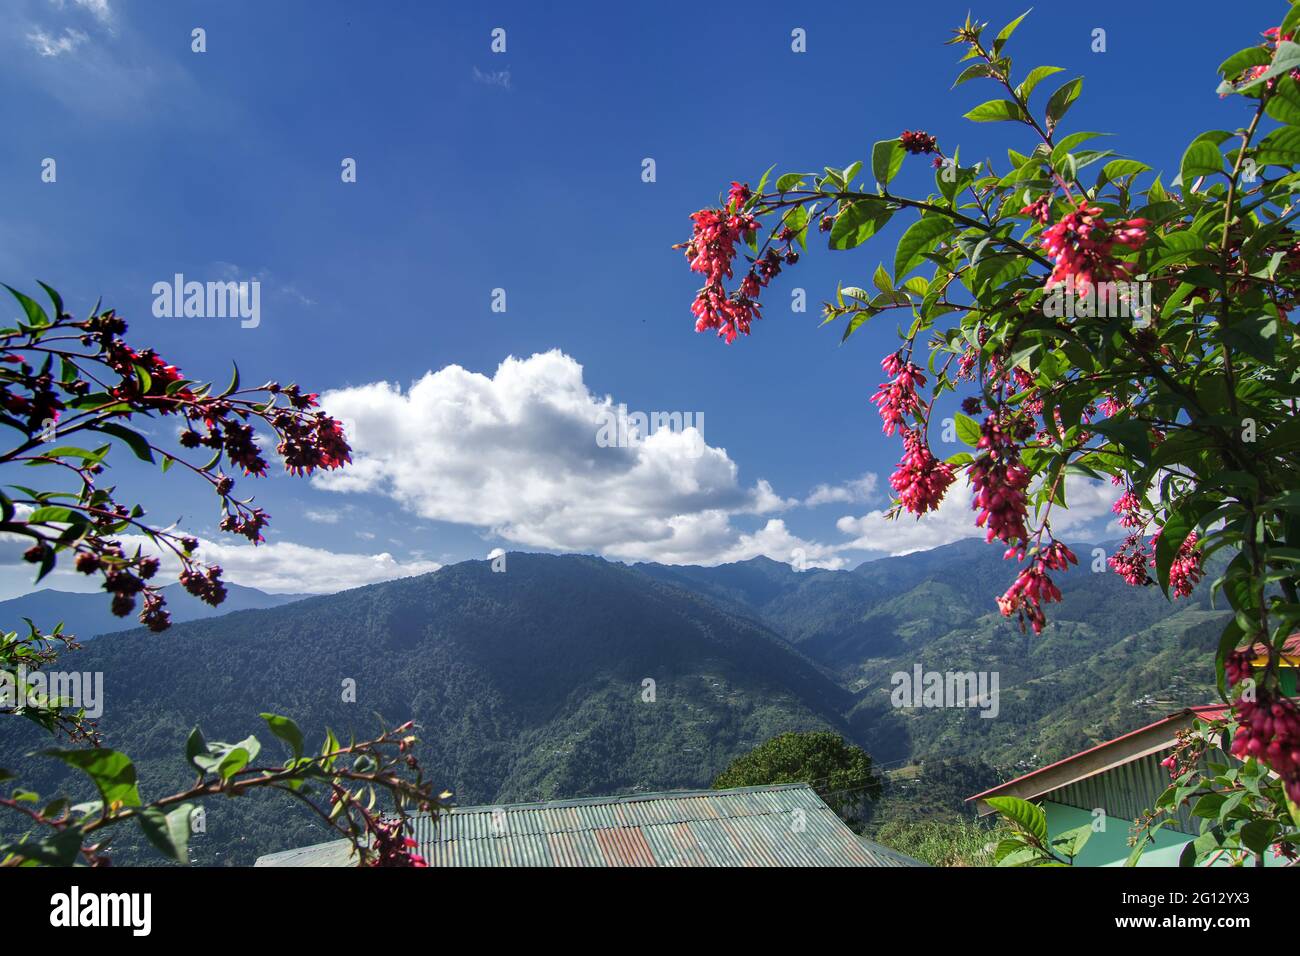 Singalila Ridge of Kanchenjunga mountain range in the morning, tree with red seasonal flowers in foreground, view from Okhrey Village, Sikkim Stock Photo